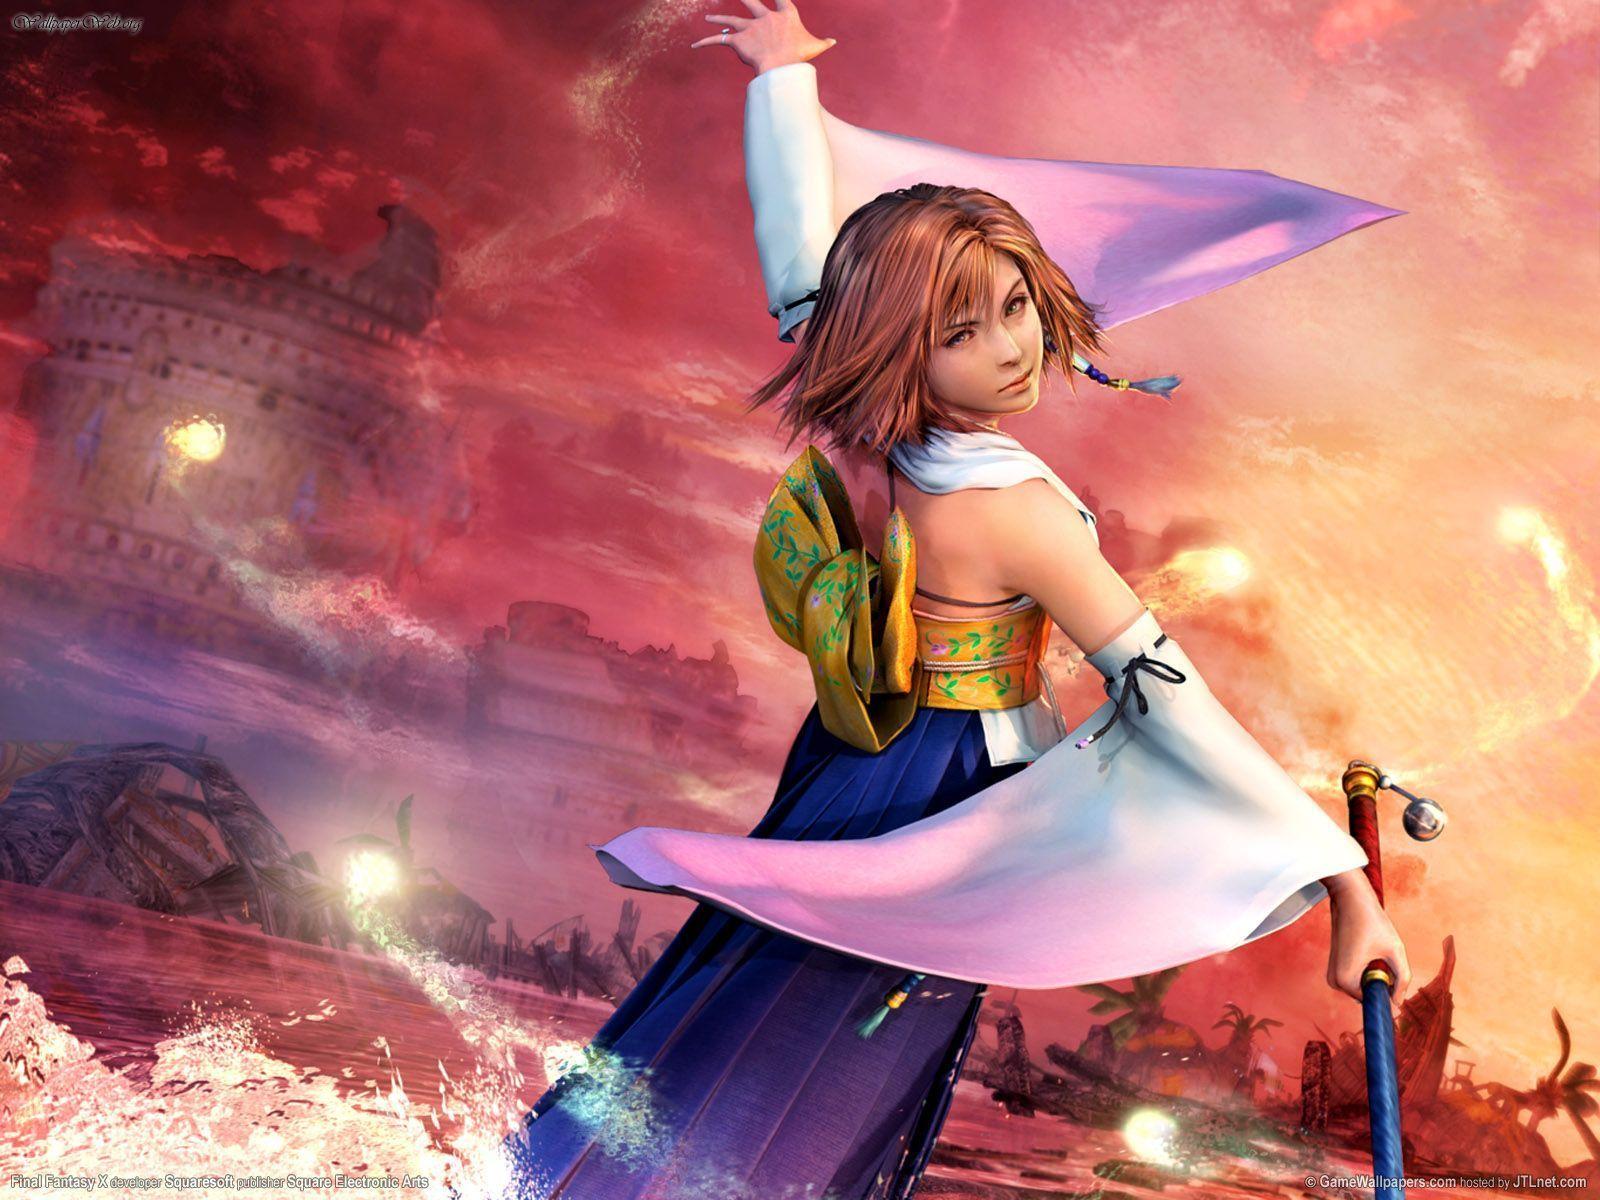 Games: Final Fantasy X, picture nr. 29587